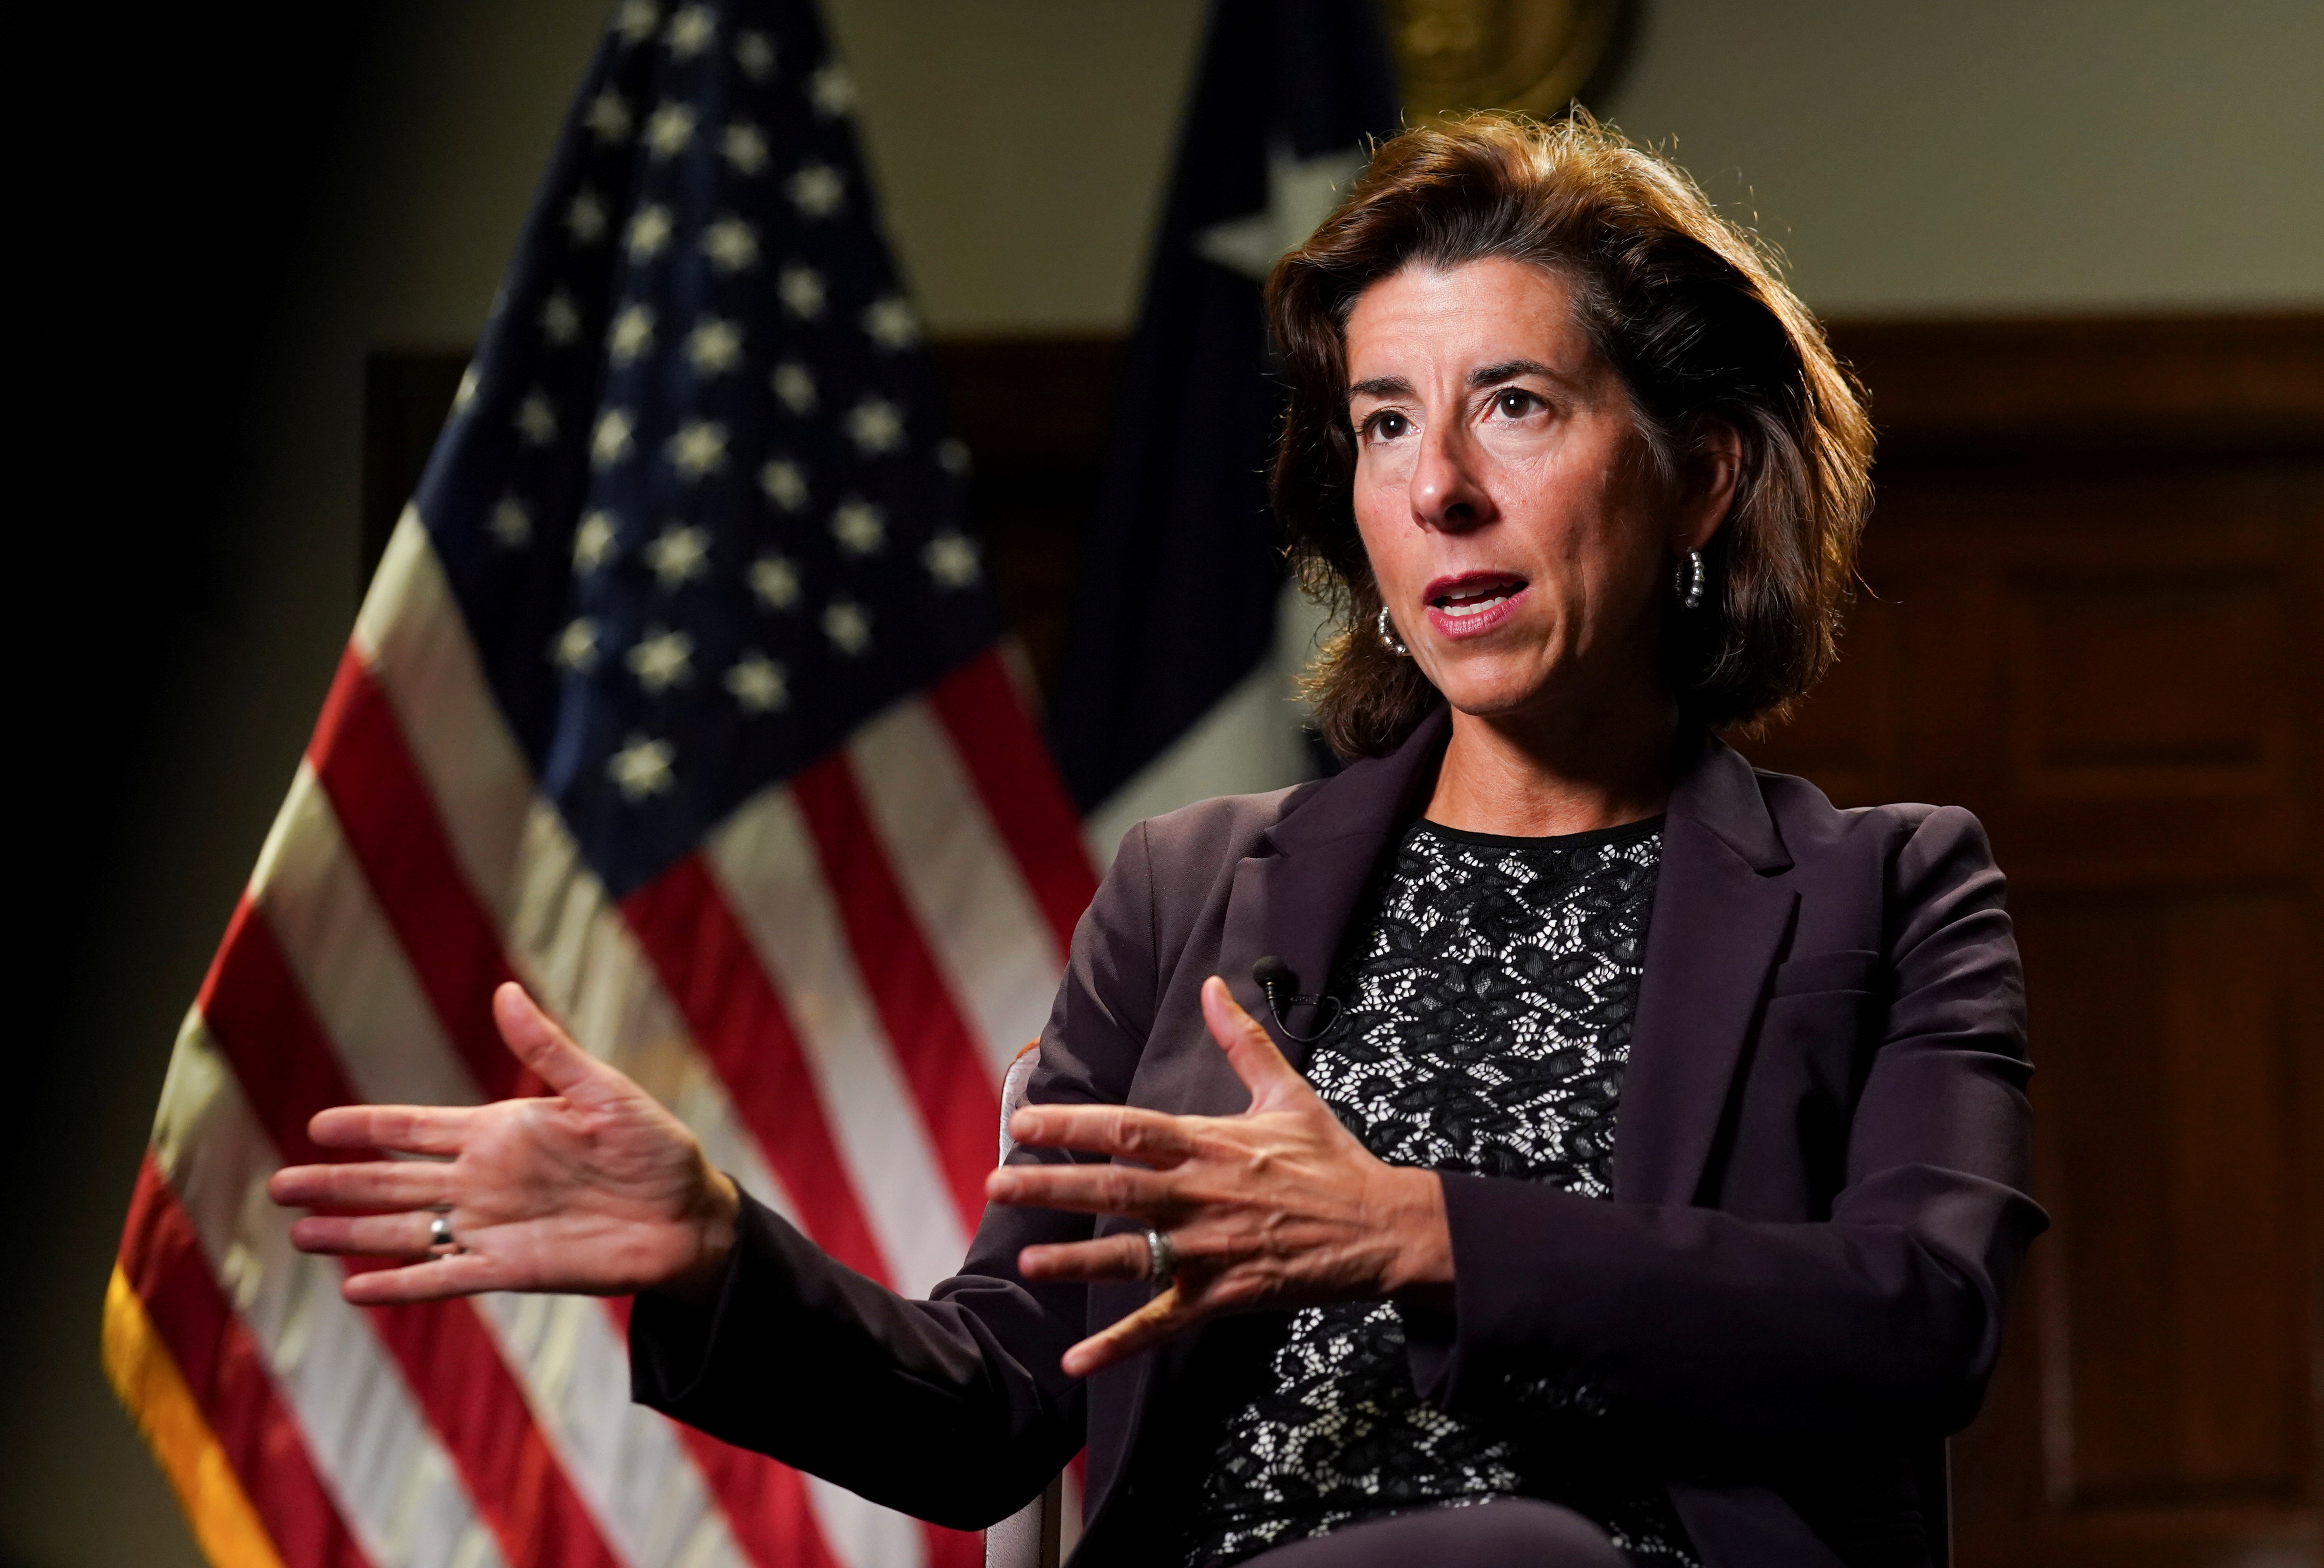 U.S. Commerce Secretary Gina Raimondo speaks during a Reuters interview at the Department of Commerce in Washington U.S., September 23, 2021. REUTERS/Kevin Lamarque